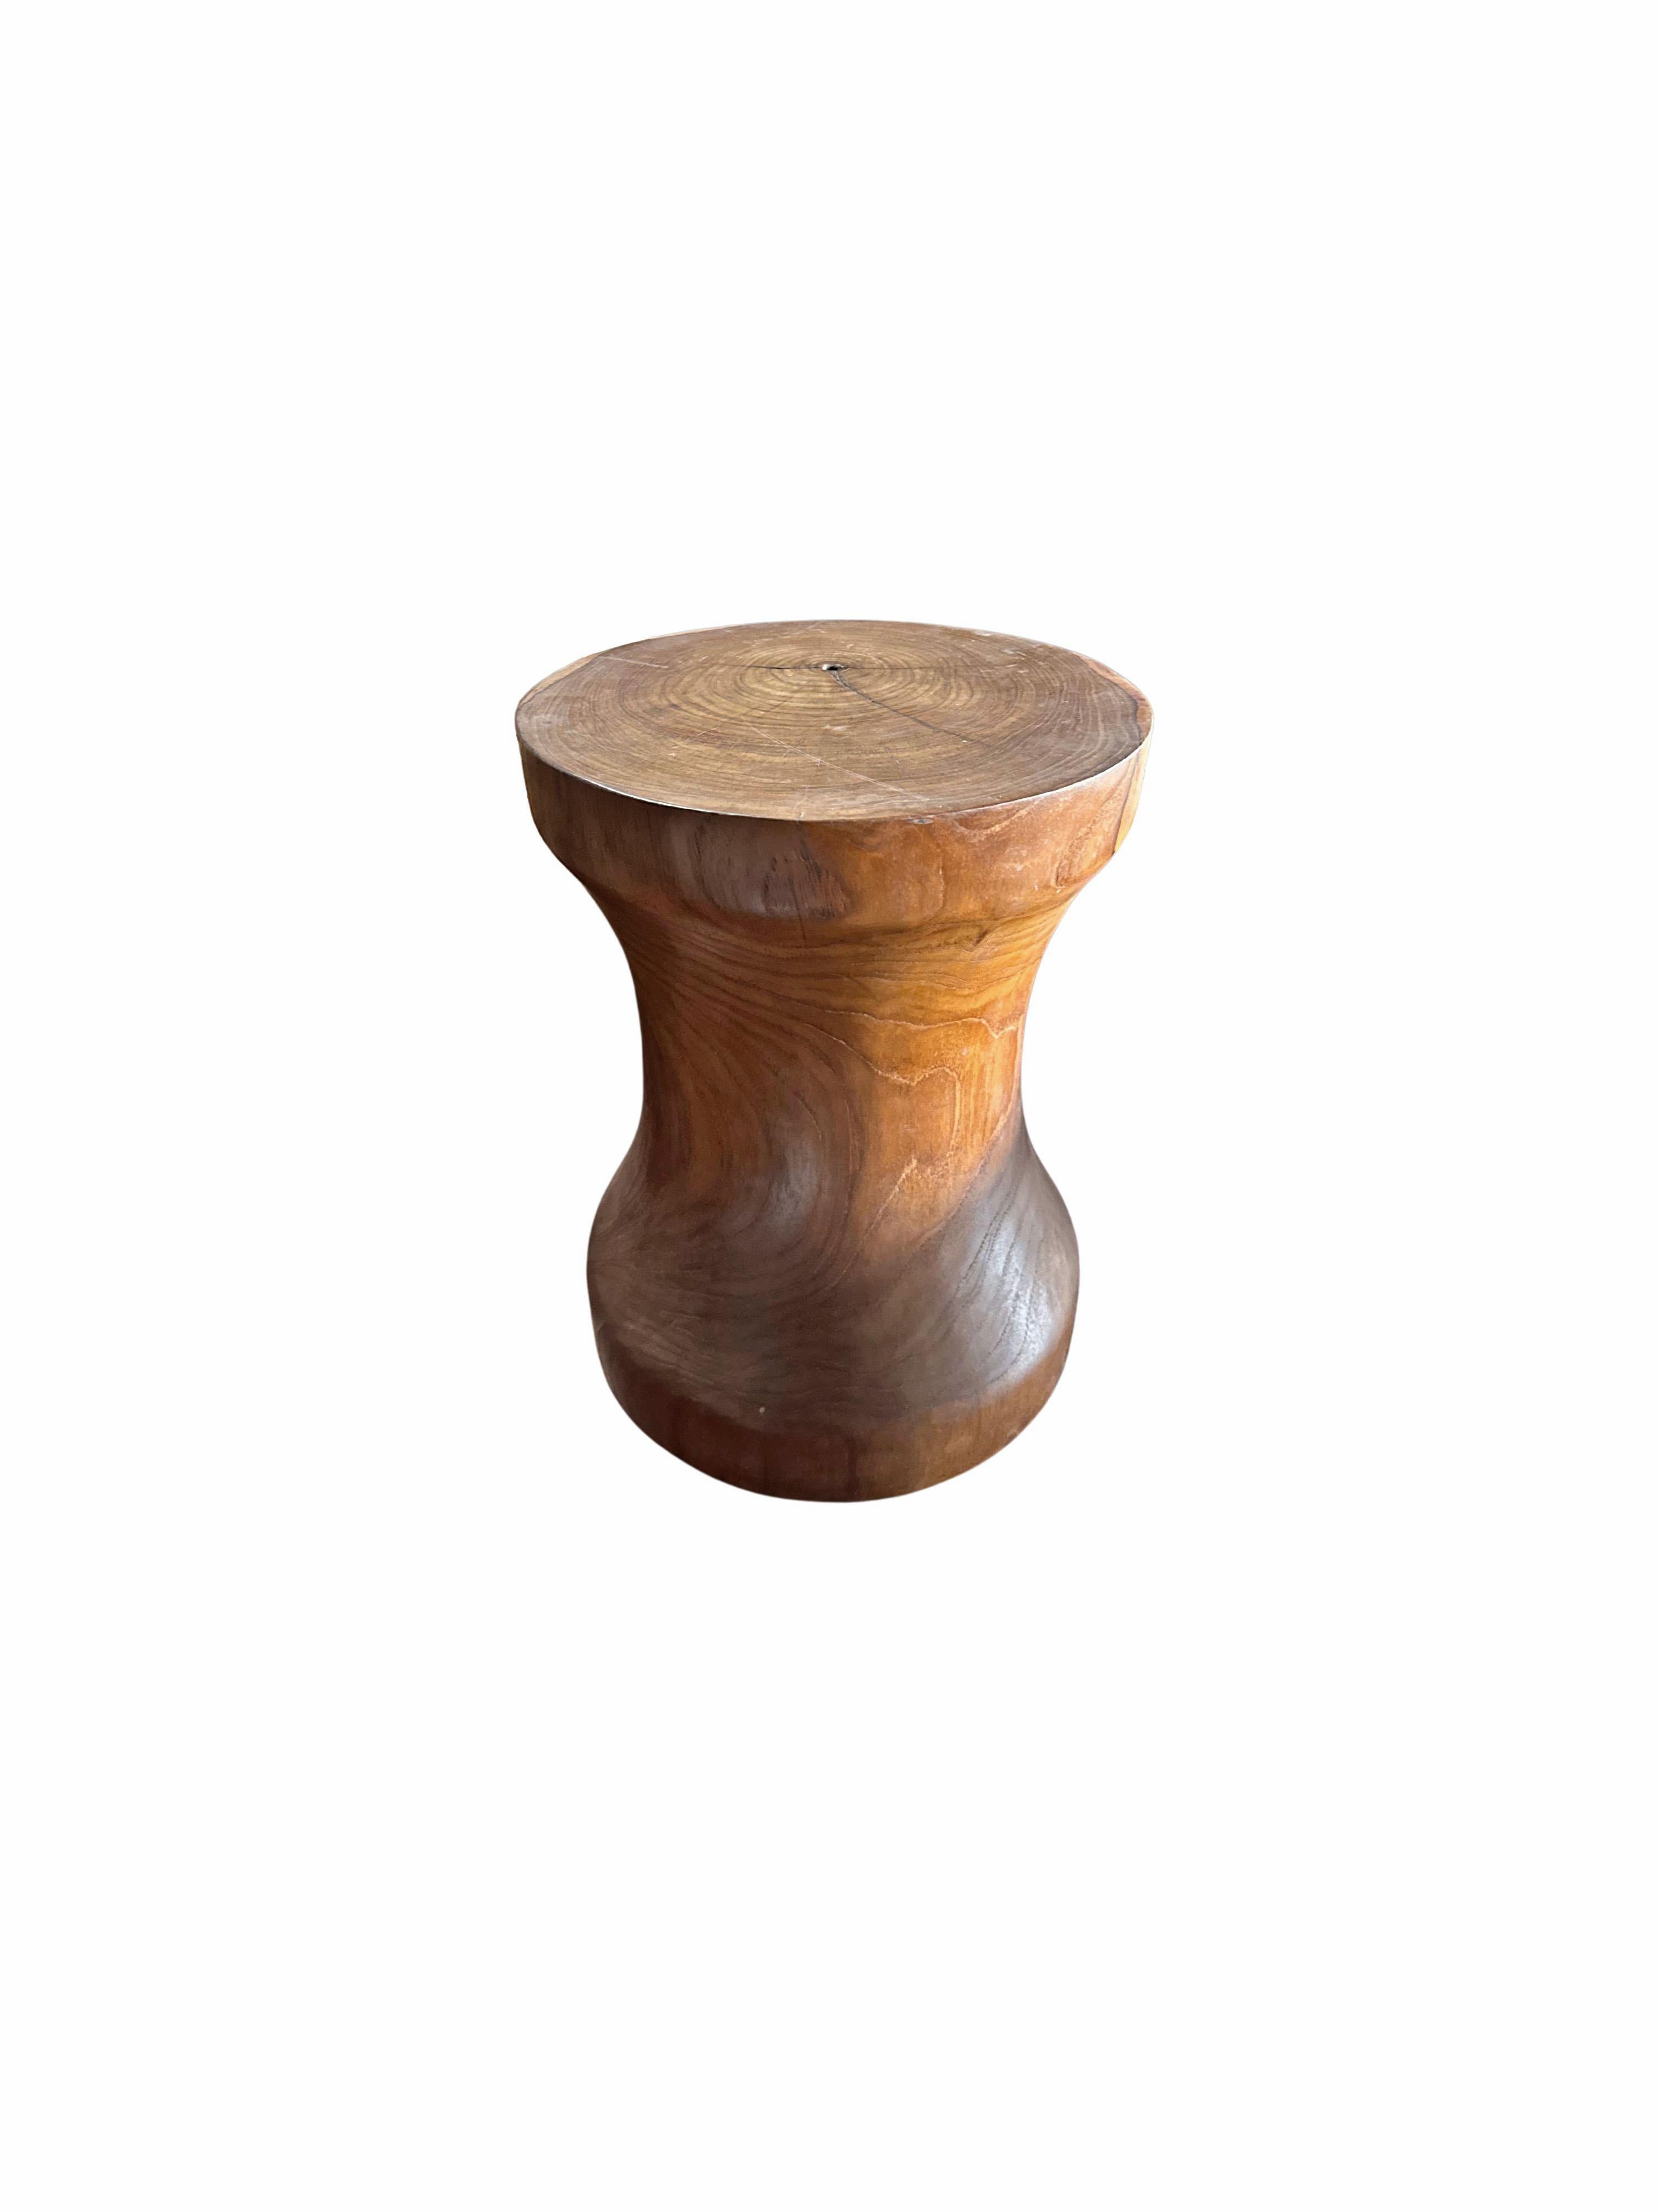 Organic Modern Sculptural Teak Wood Side Table, with Stunning Wood Textures, Modern Organic For Sale